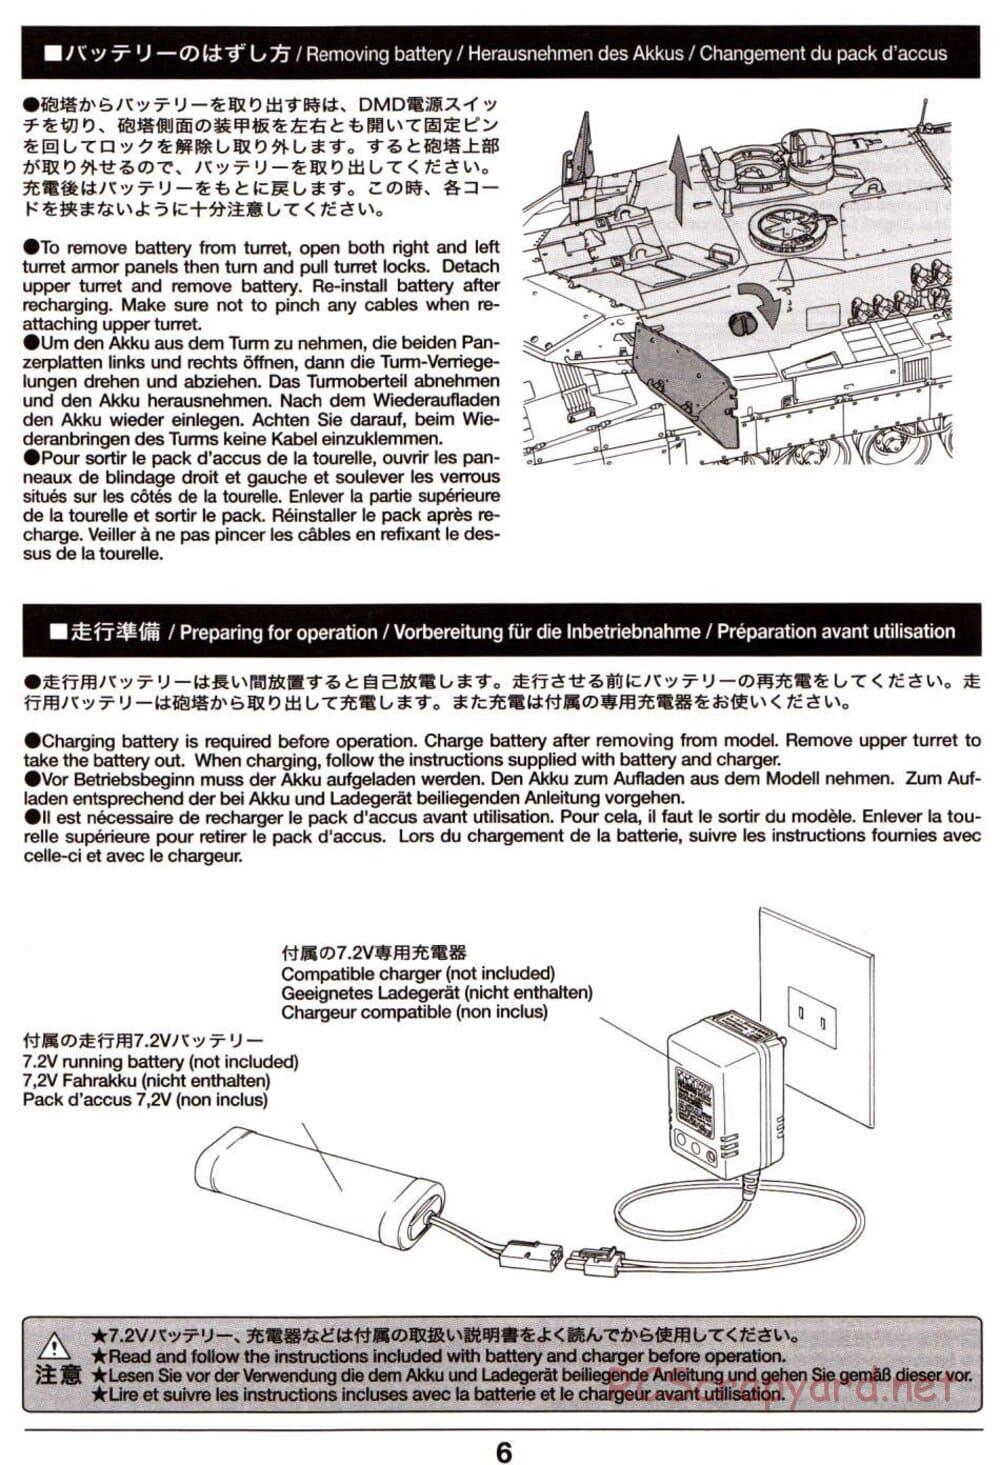 Tamiya - Leopard 2 A6 - 1/16 Scale Chassis - Operation Manual - Page 6